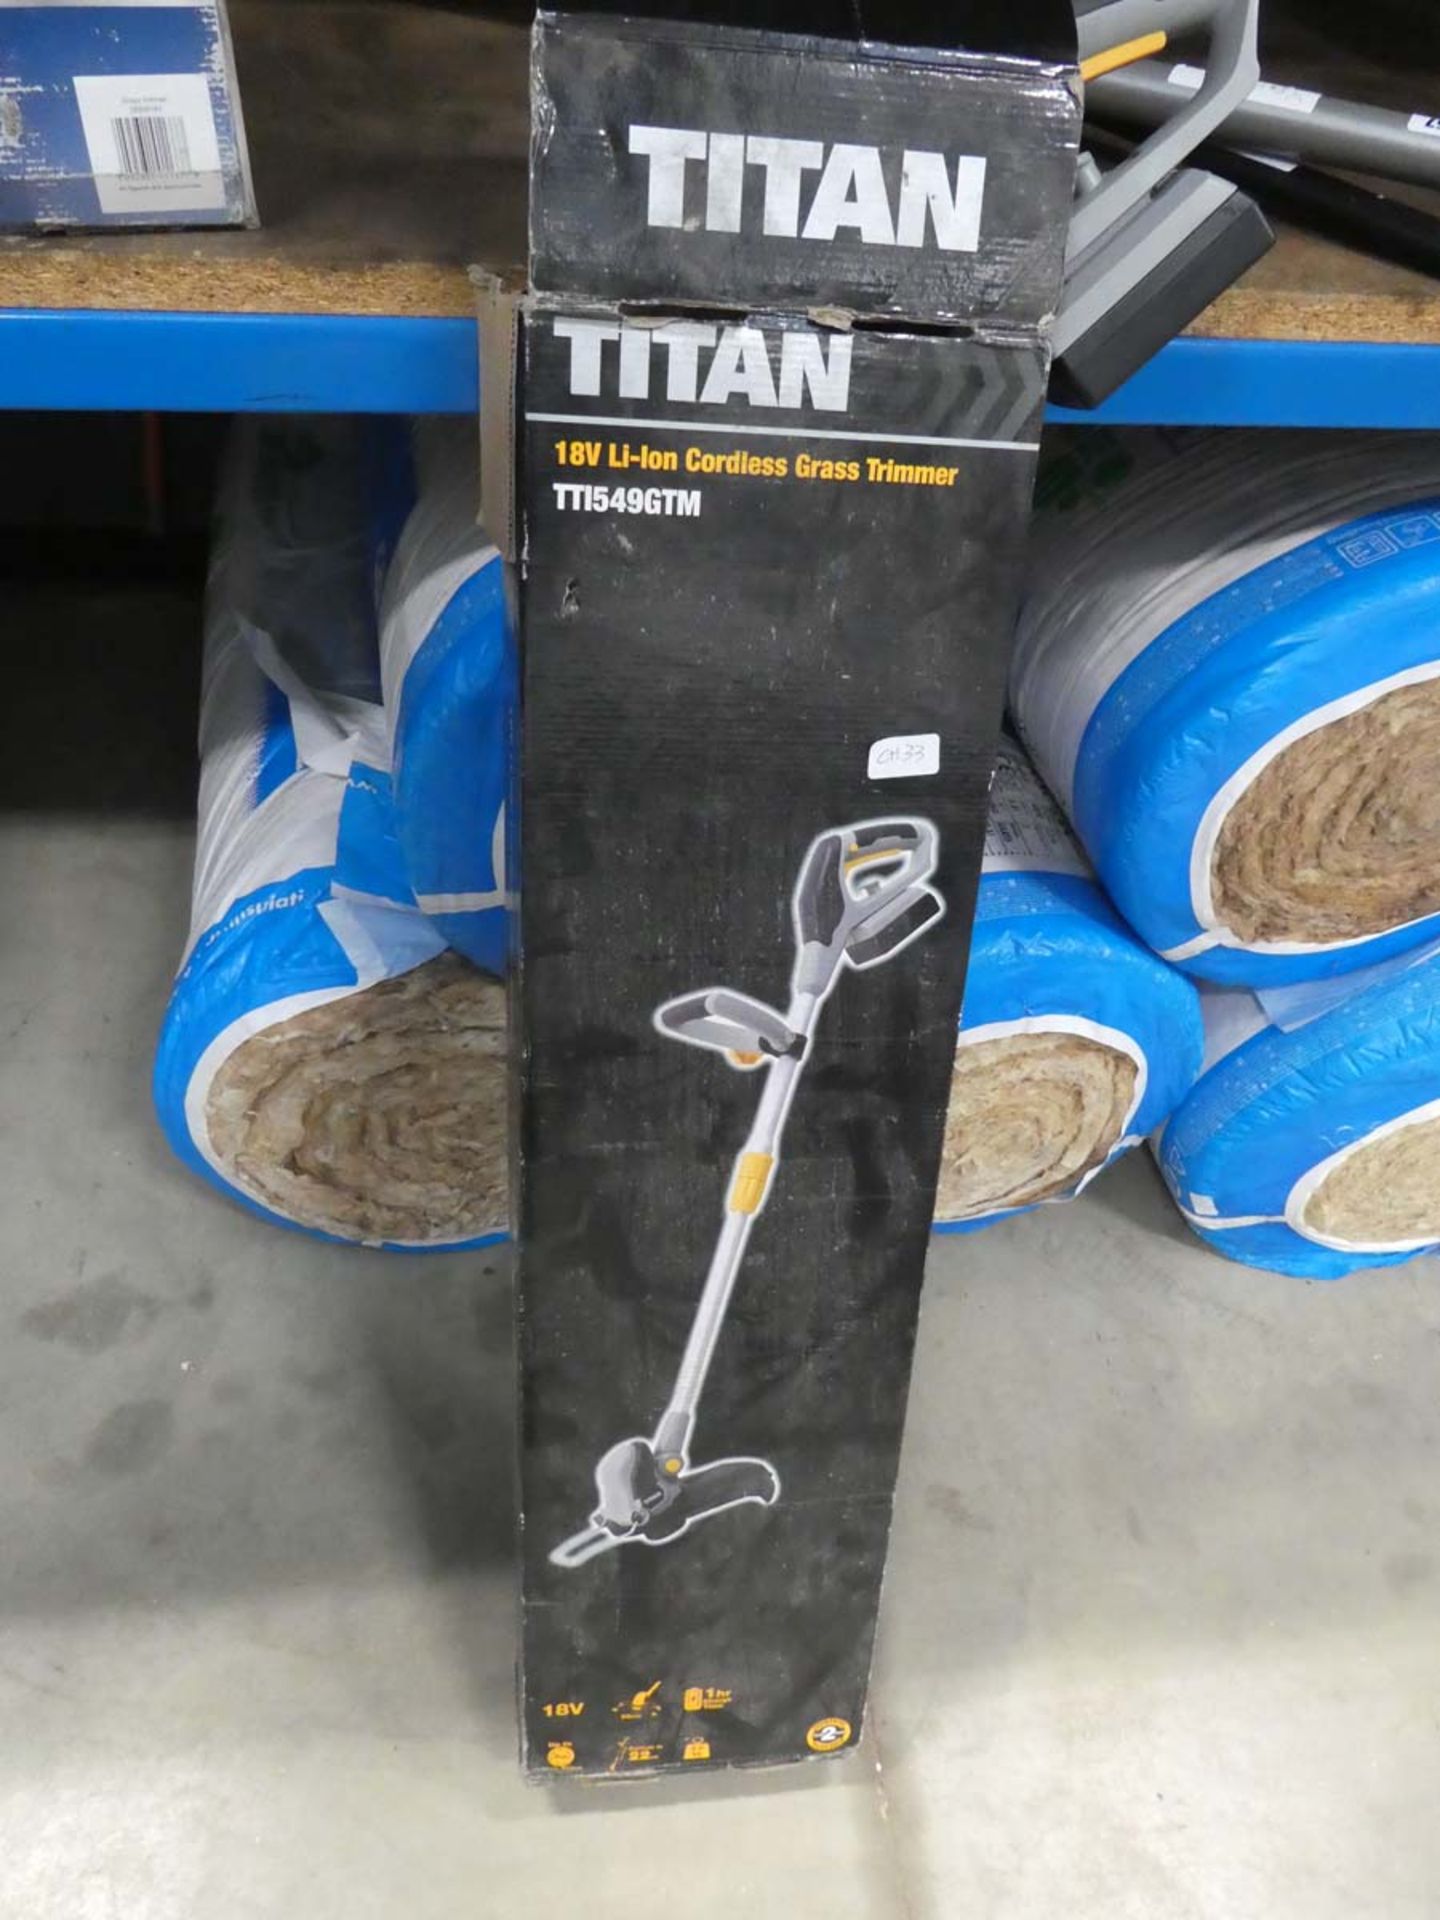 Titan battery powered strimmer with 1 battery and charger